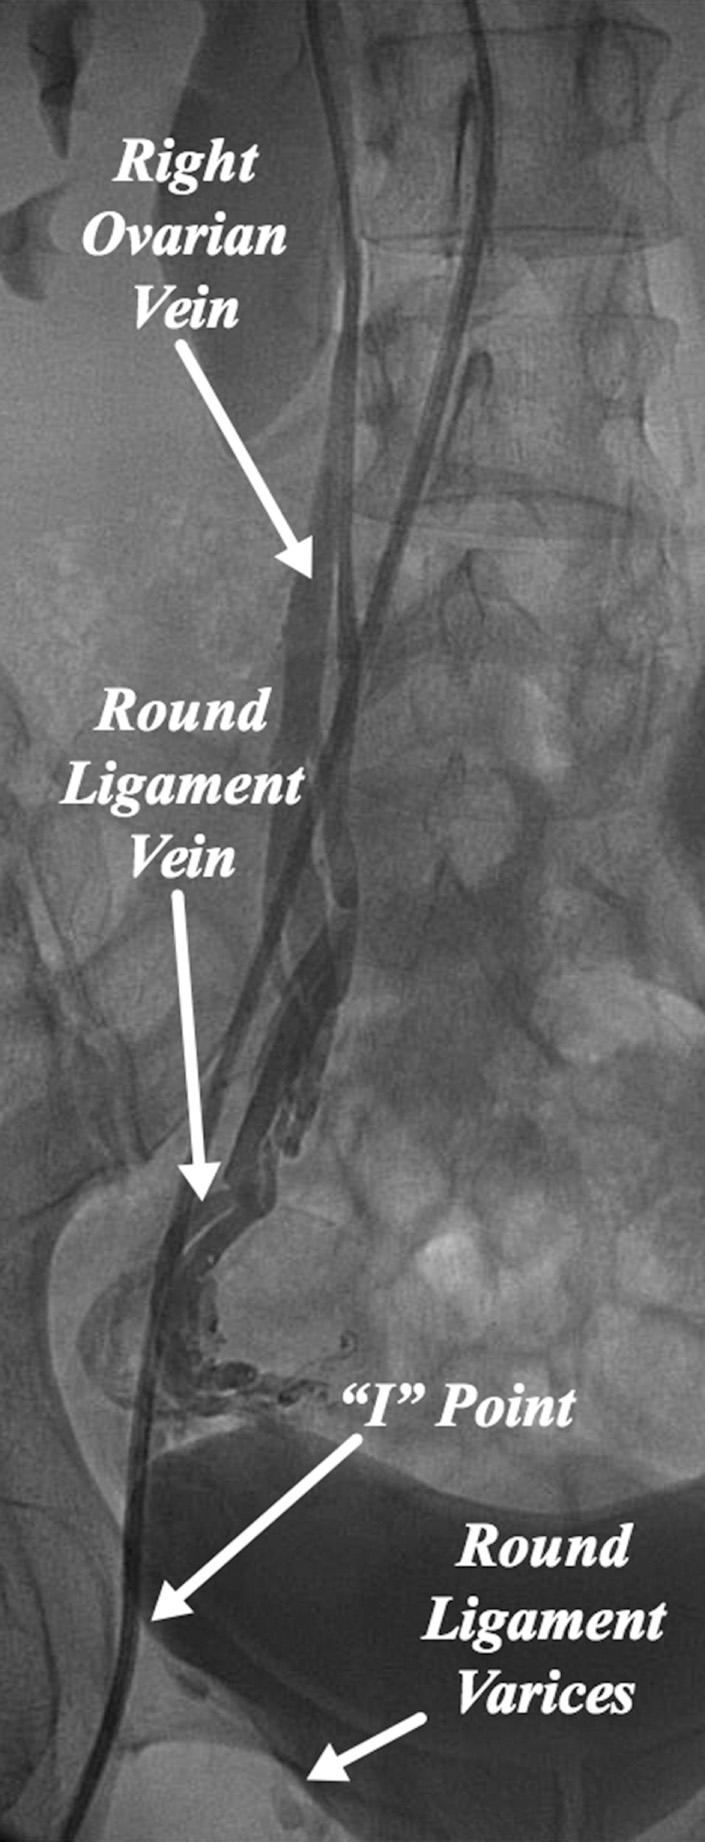 Fig. 21.3, Right ovarian venography demonstrating the vein of the round ligament arising from the ovarian vein and passing through the inguinal canal (inguinal “I” point) to communicate with labial varices.